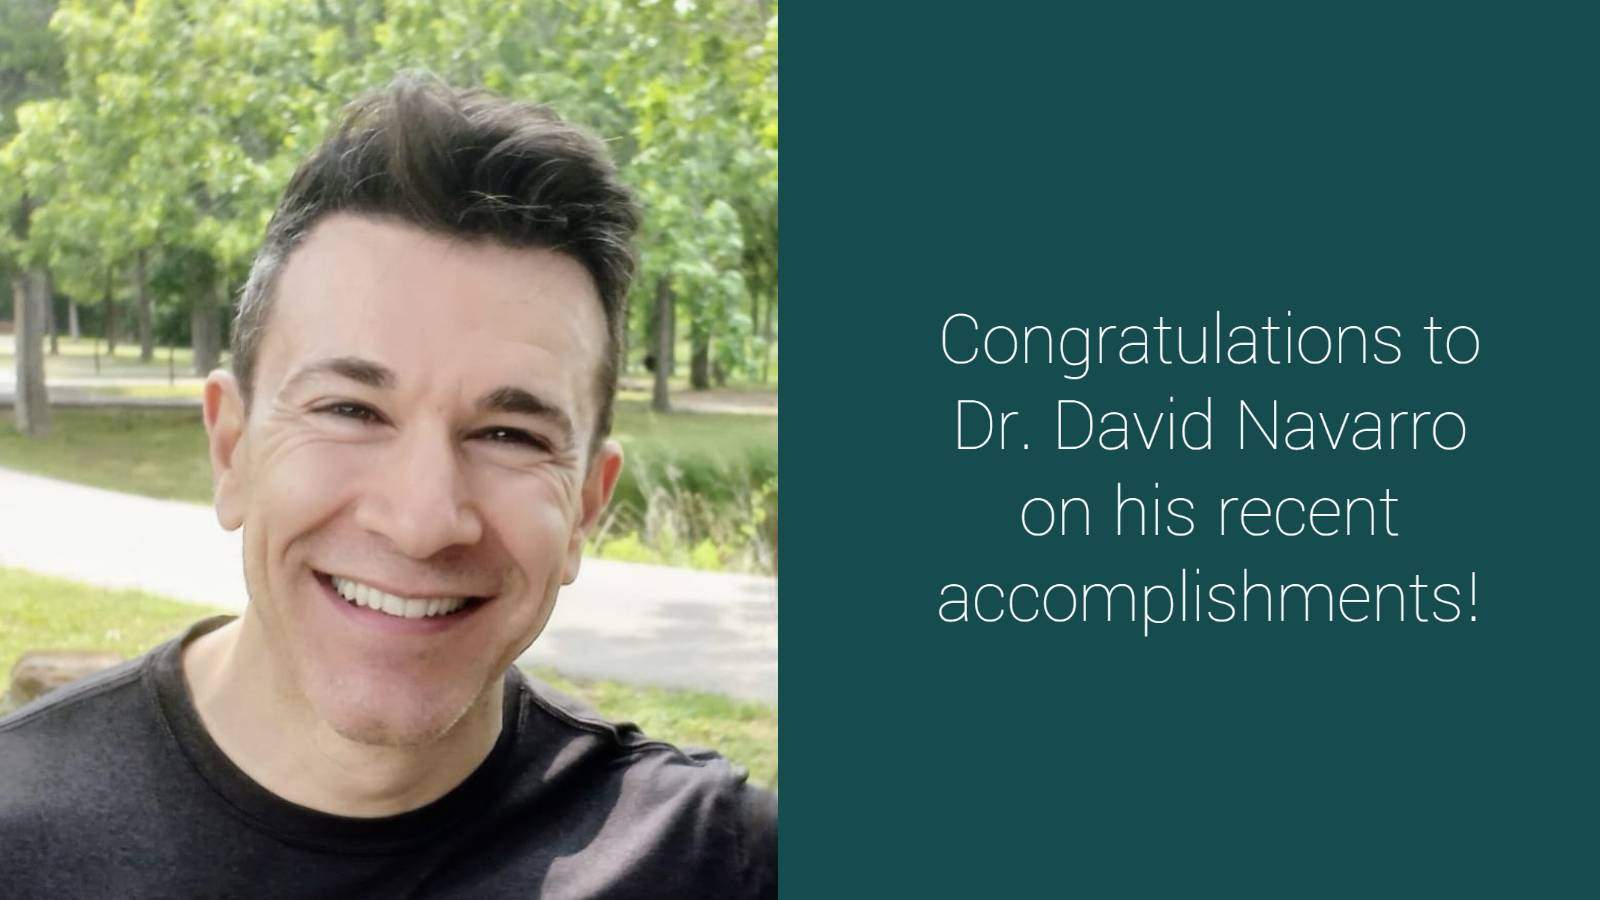 Man smiling, with trees, grass, sidewalk behind him. Text: Congratulations to Dr. David Navarro for his recent accomplishments!